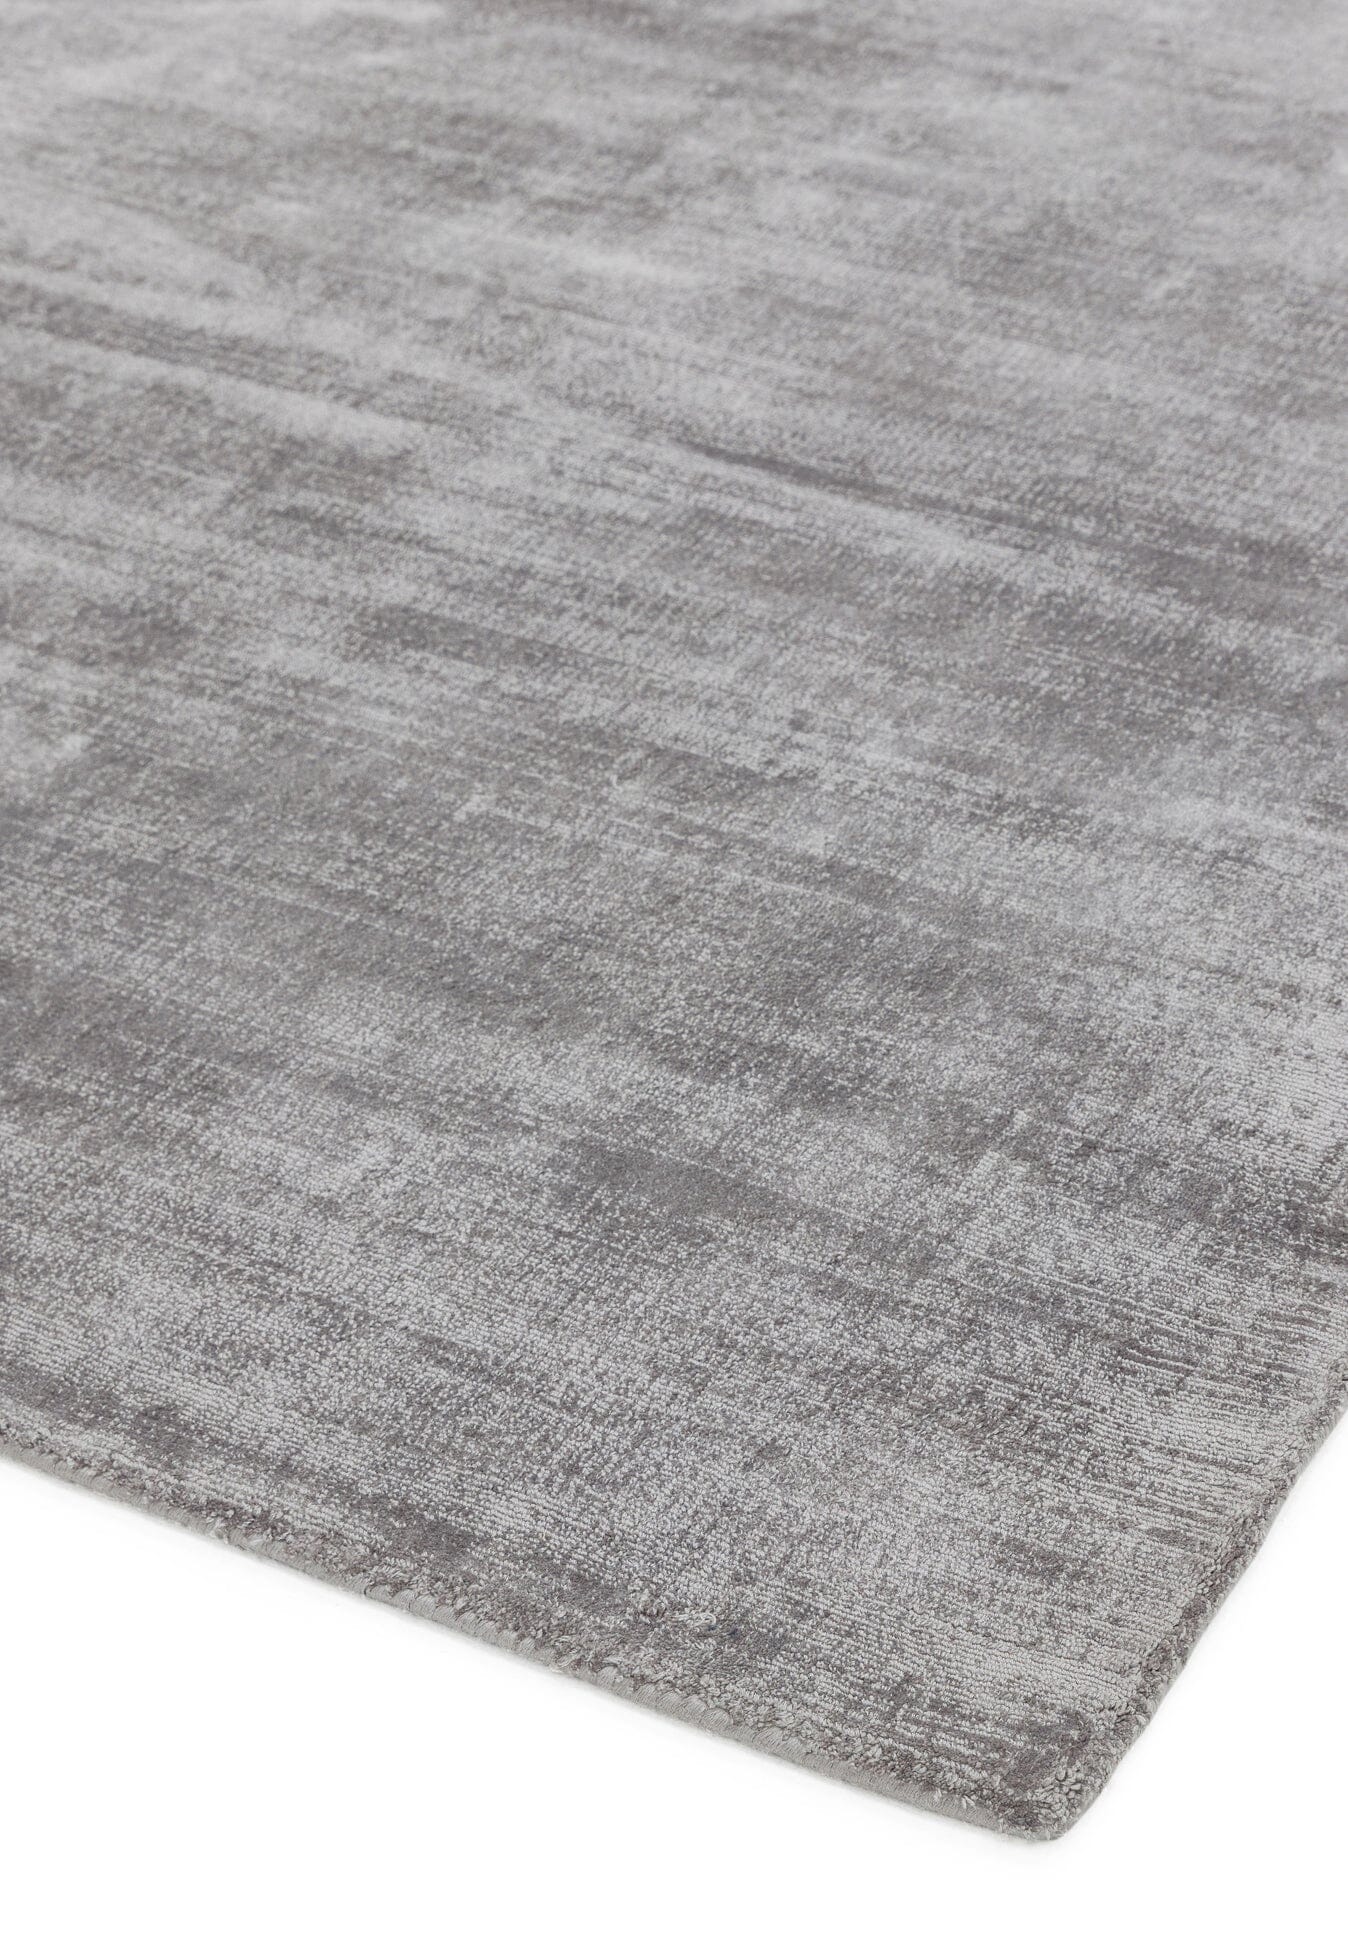  Asiatic Carpets-Asiatic Carpets Blade Hand Woven Runner Silver - 66 x 240cm-Grey, Silver 325 